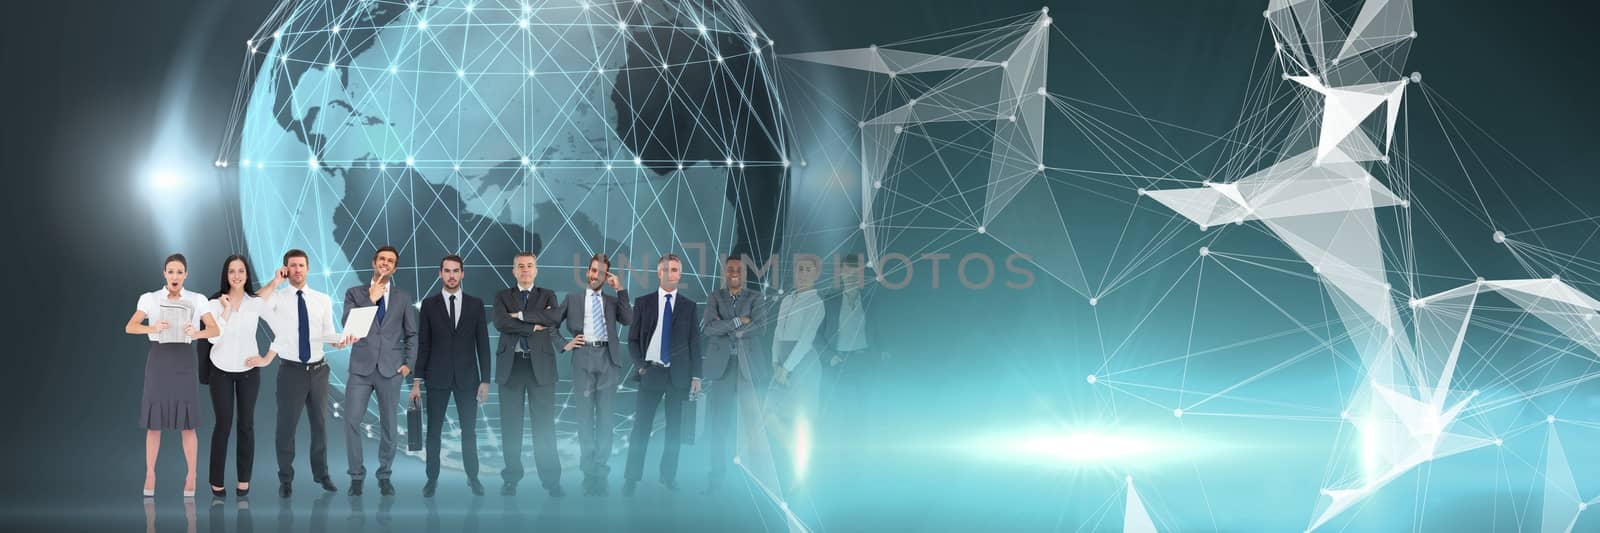 Digital composite of Business people standing in front of world globe with lights